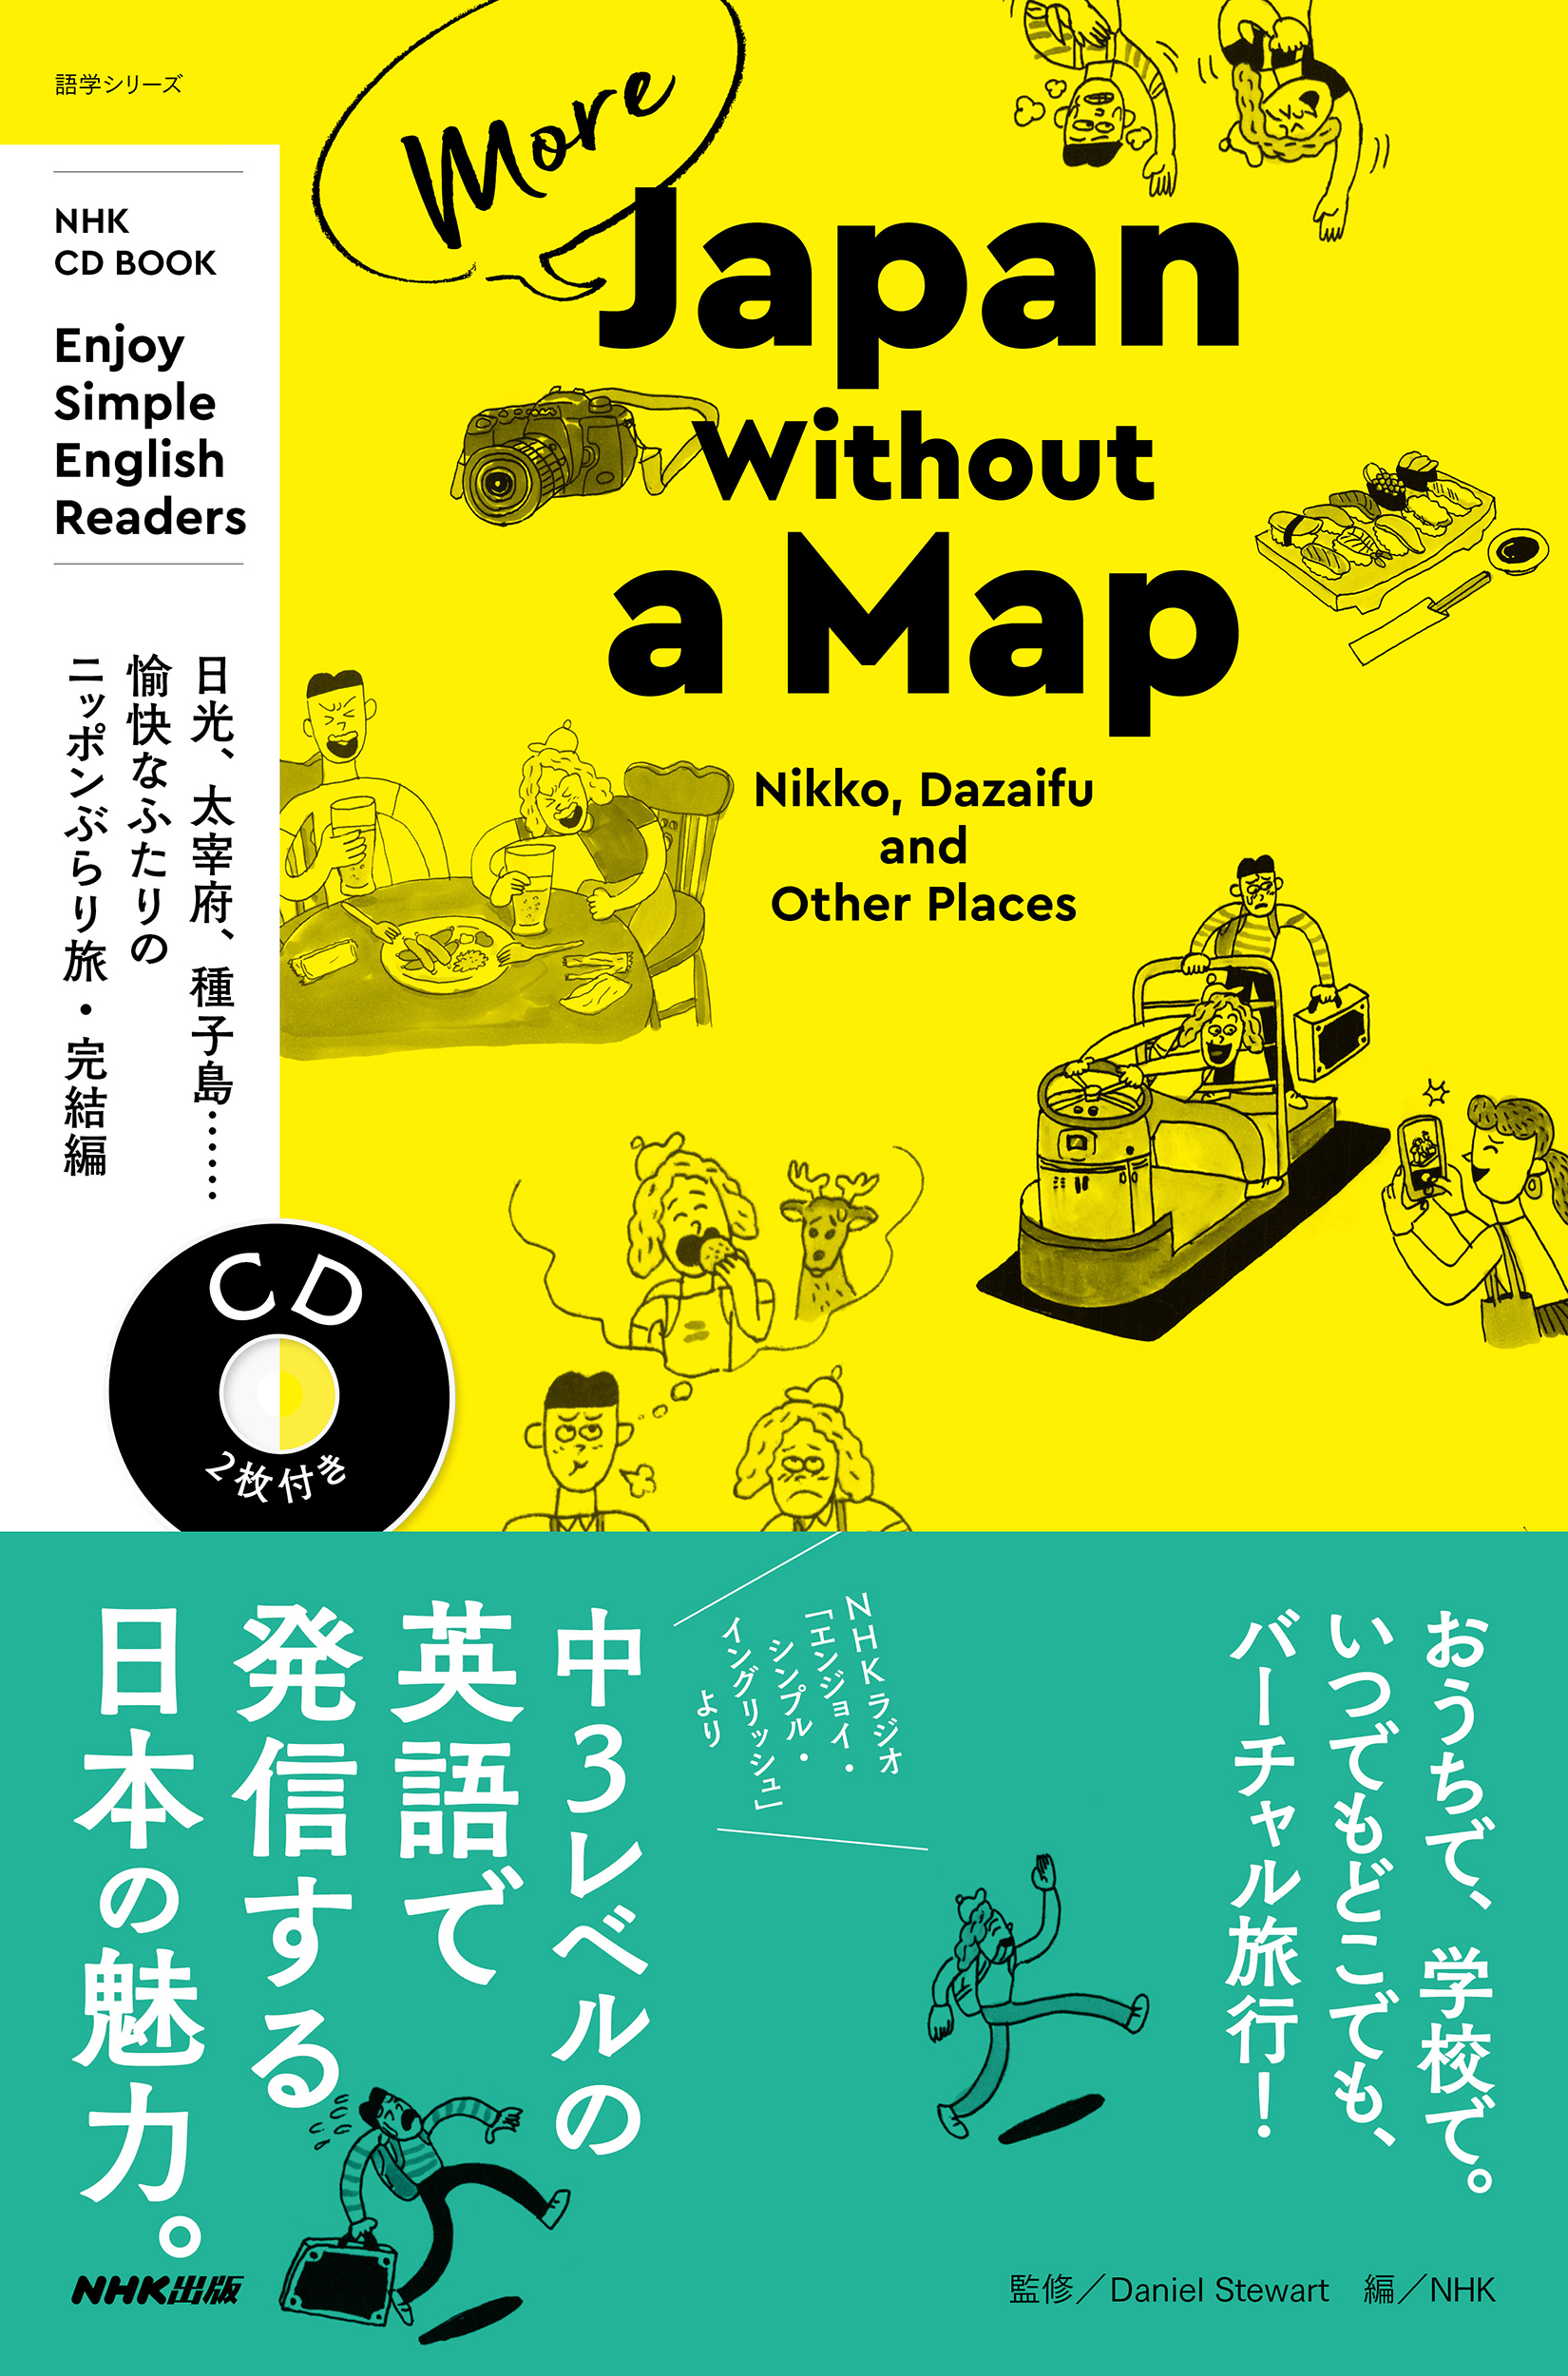 NHK CD BOOK Enjoy Simple English Readers More Japan Without a Mapの商品画像